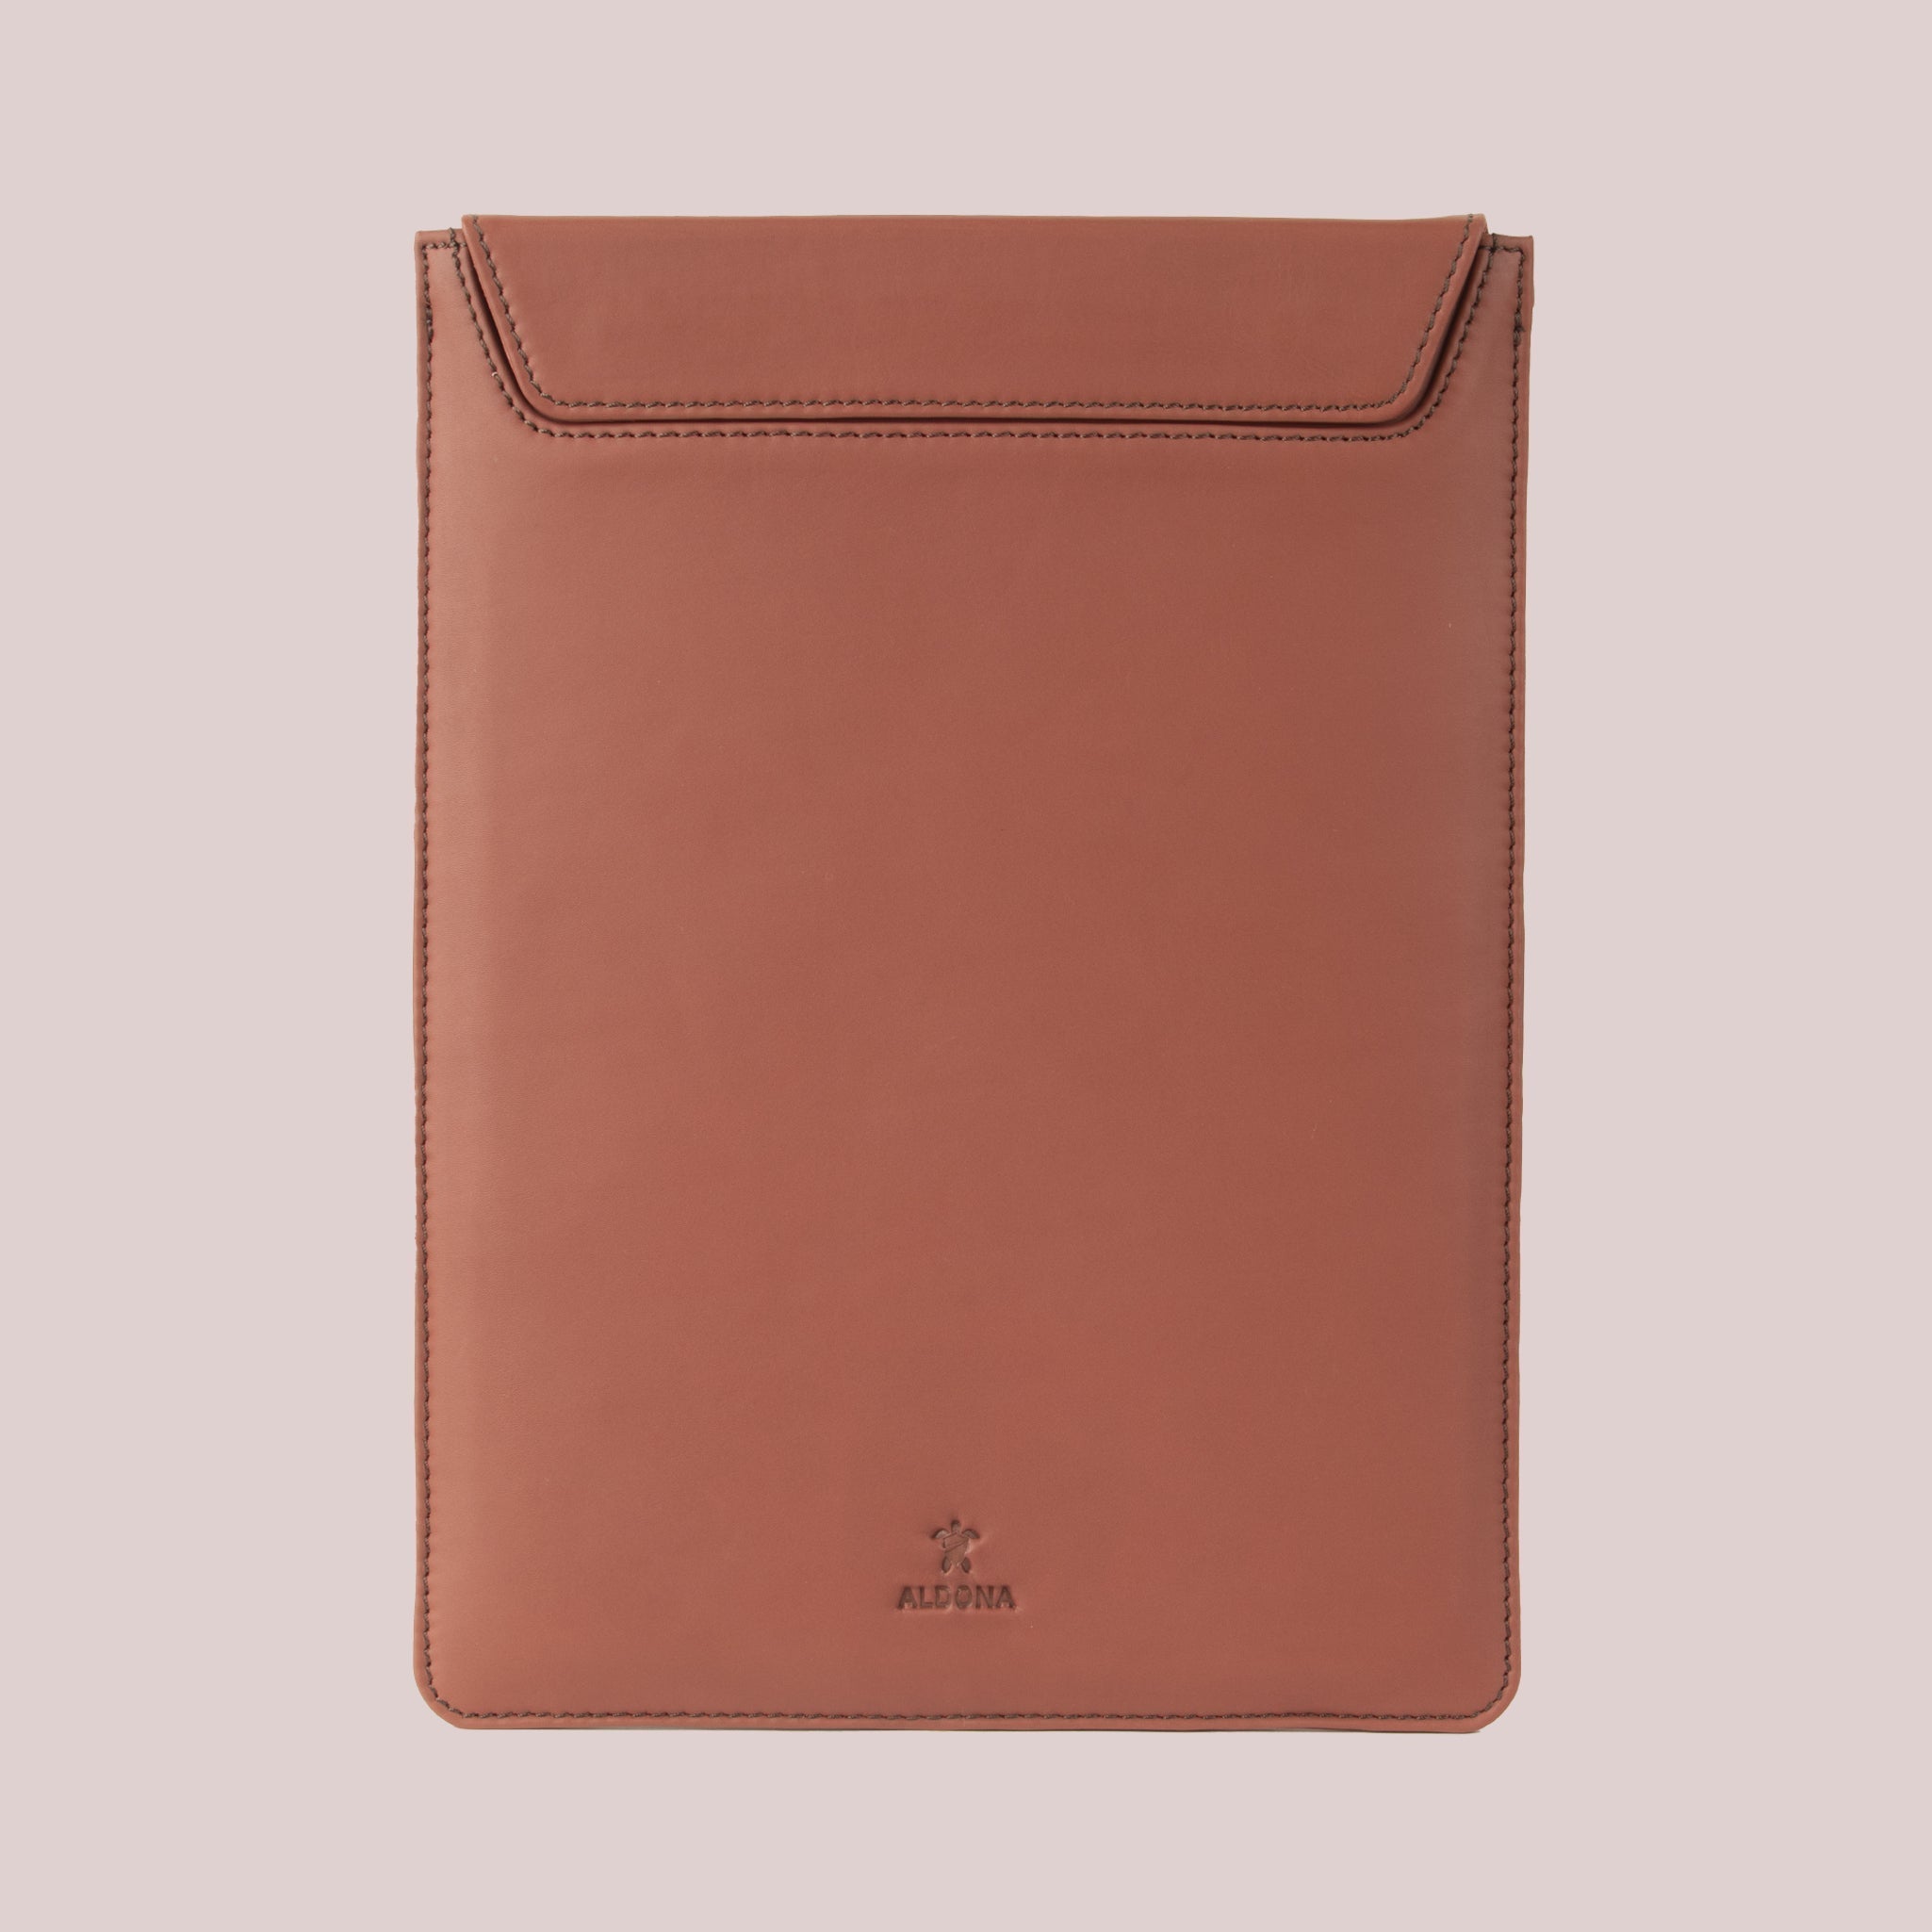 Order online Macbook leather sleeve in a stylish brown color